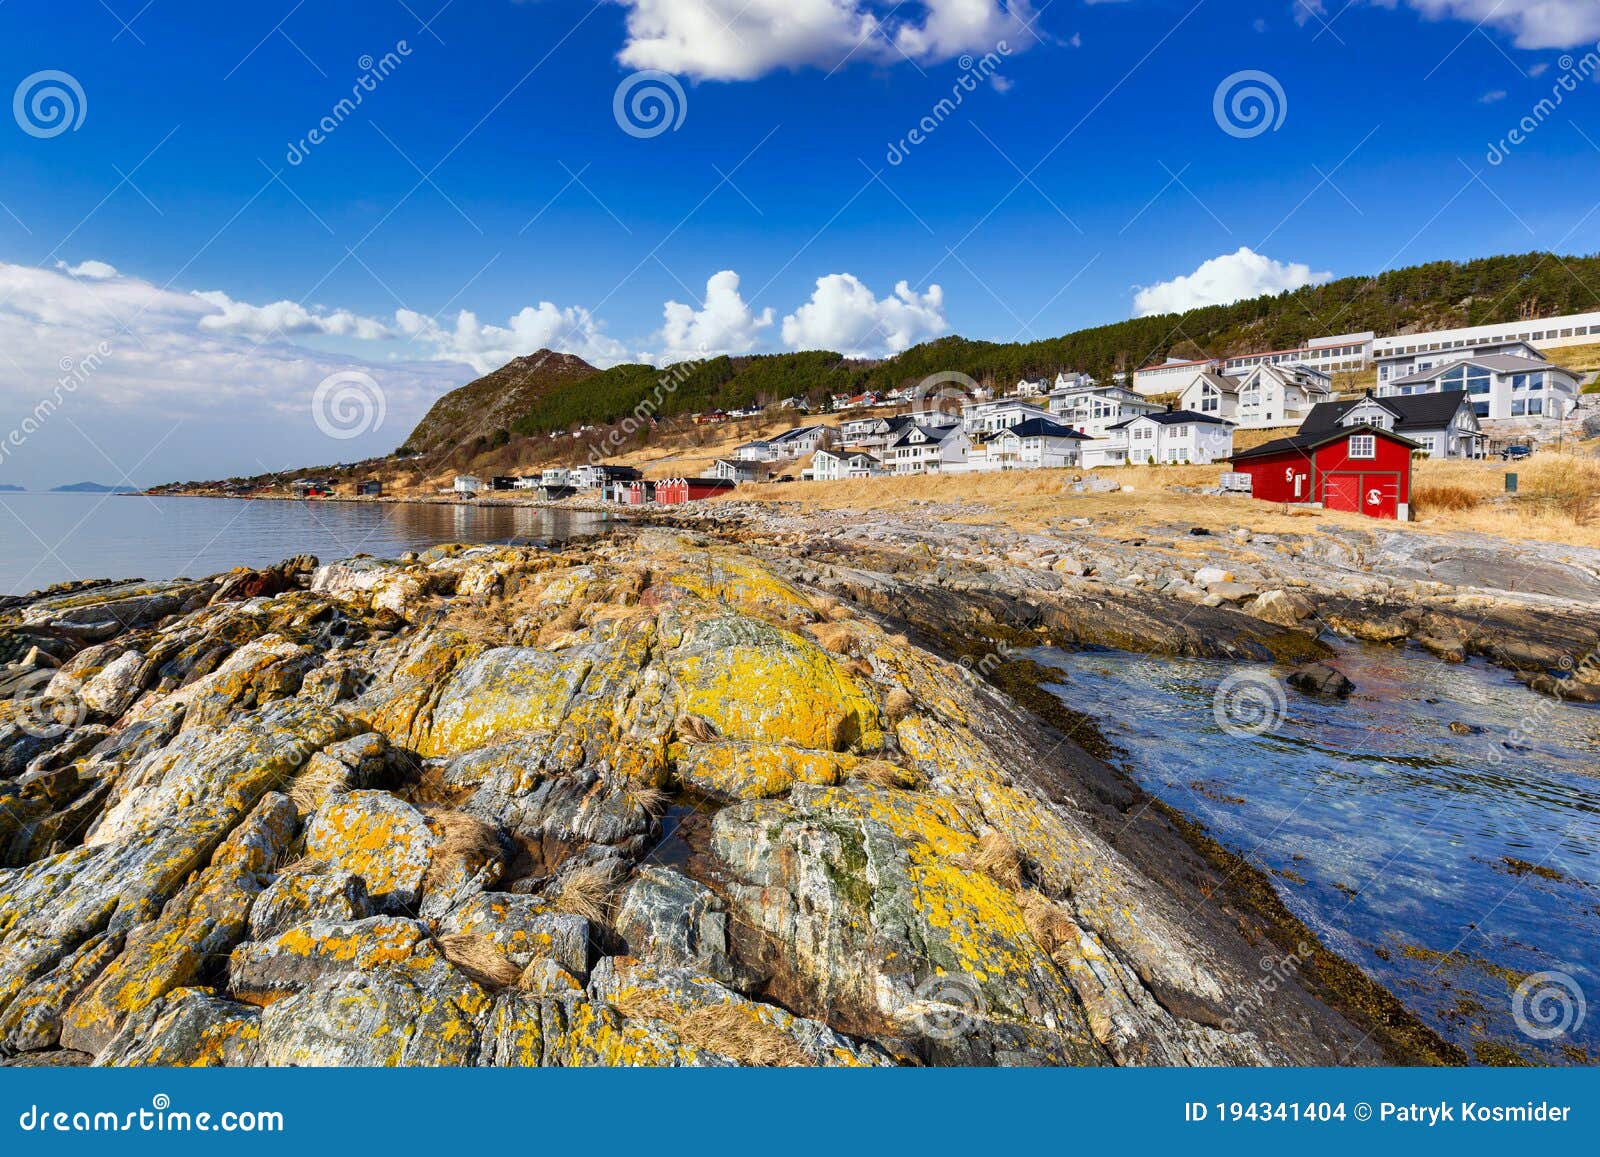 Beautiful Scenery of West Coastline with Fiords in Norway Stock Photo ...